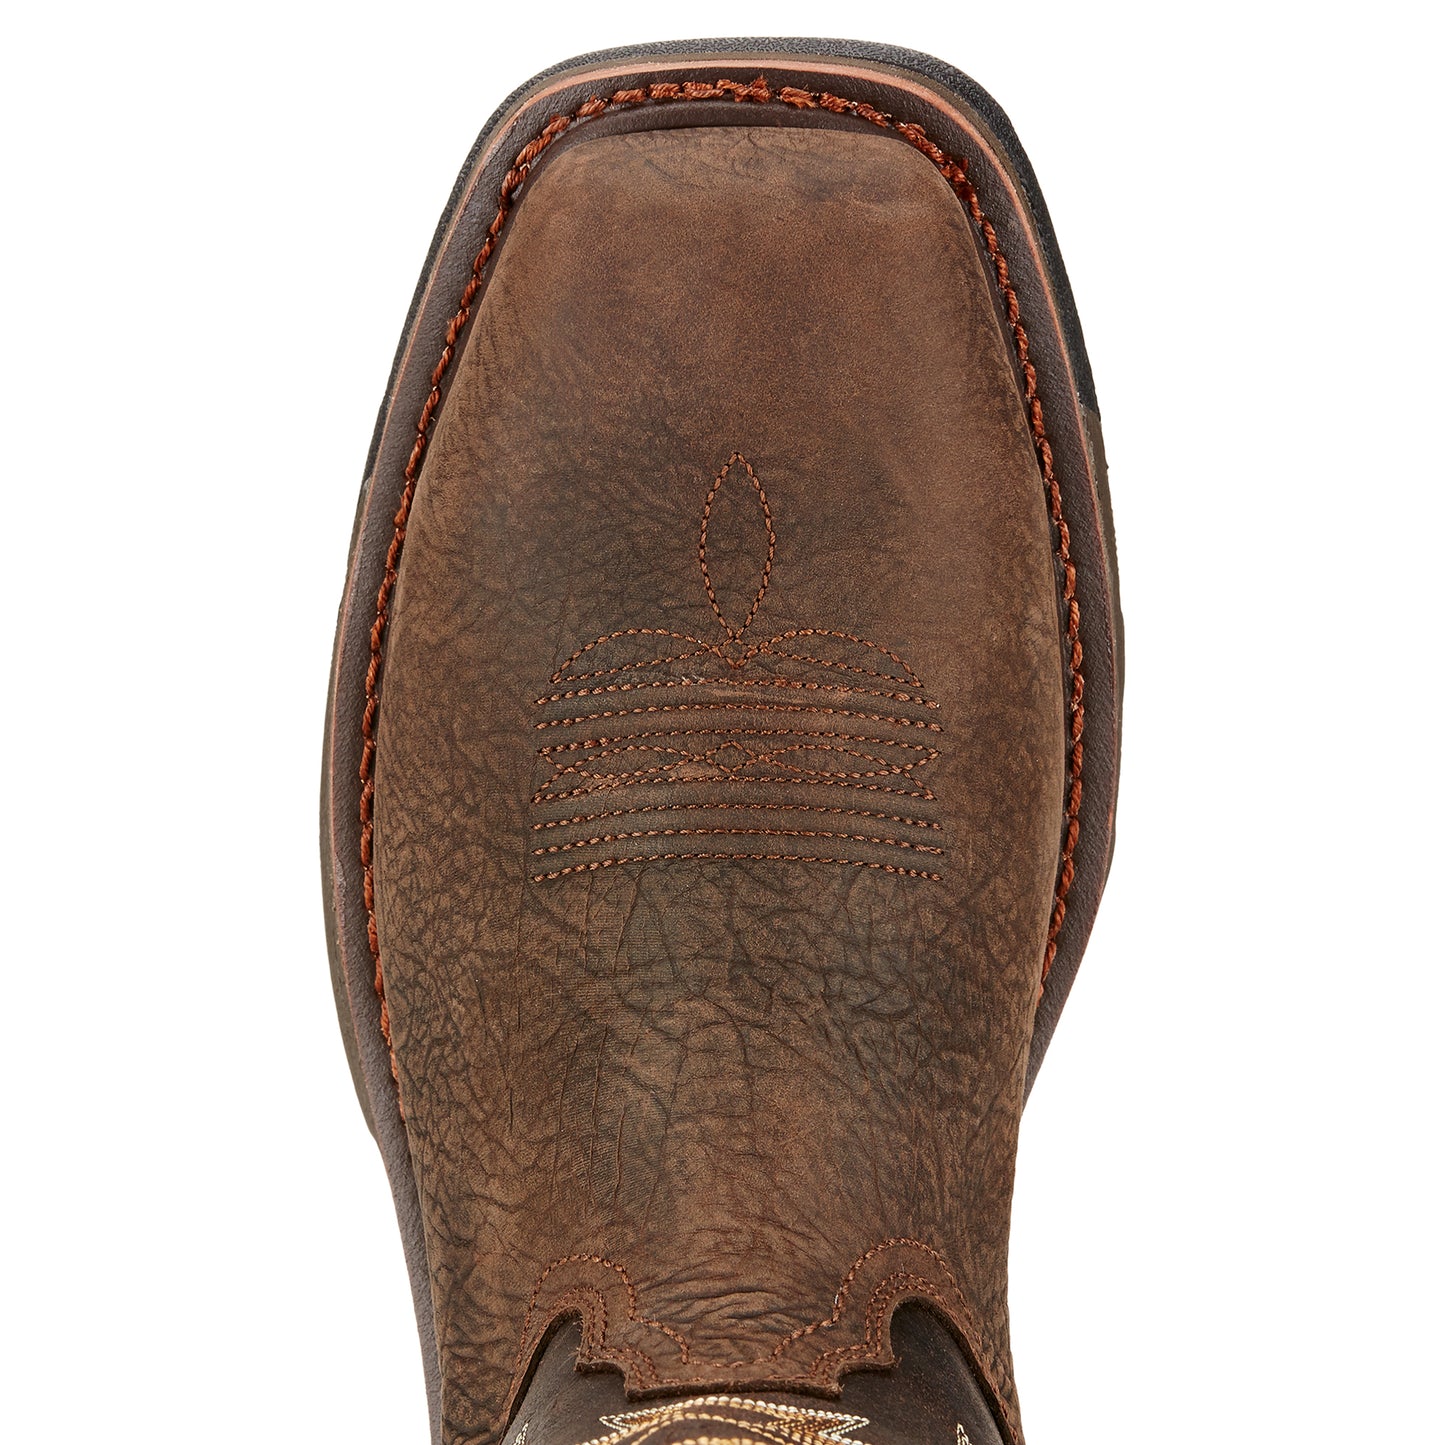 Ariat Men's Workhog Wide Square Toe Comp Toe Water Proof #10017420